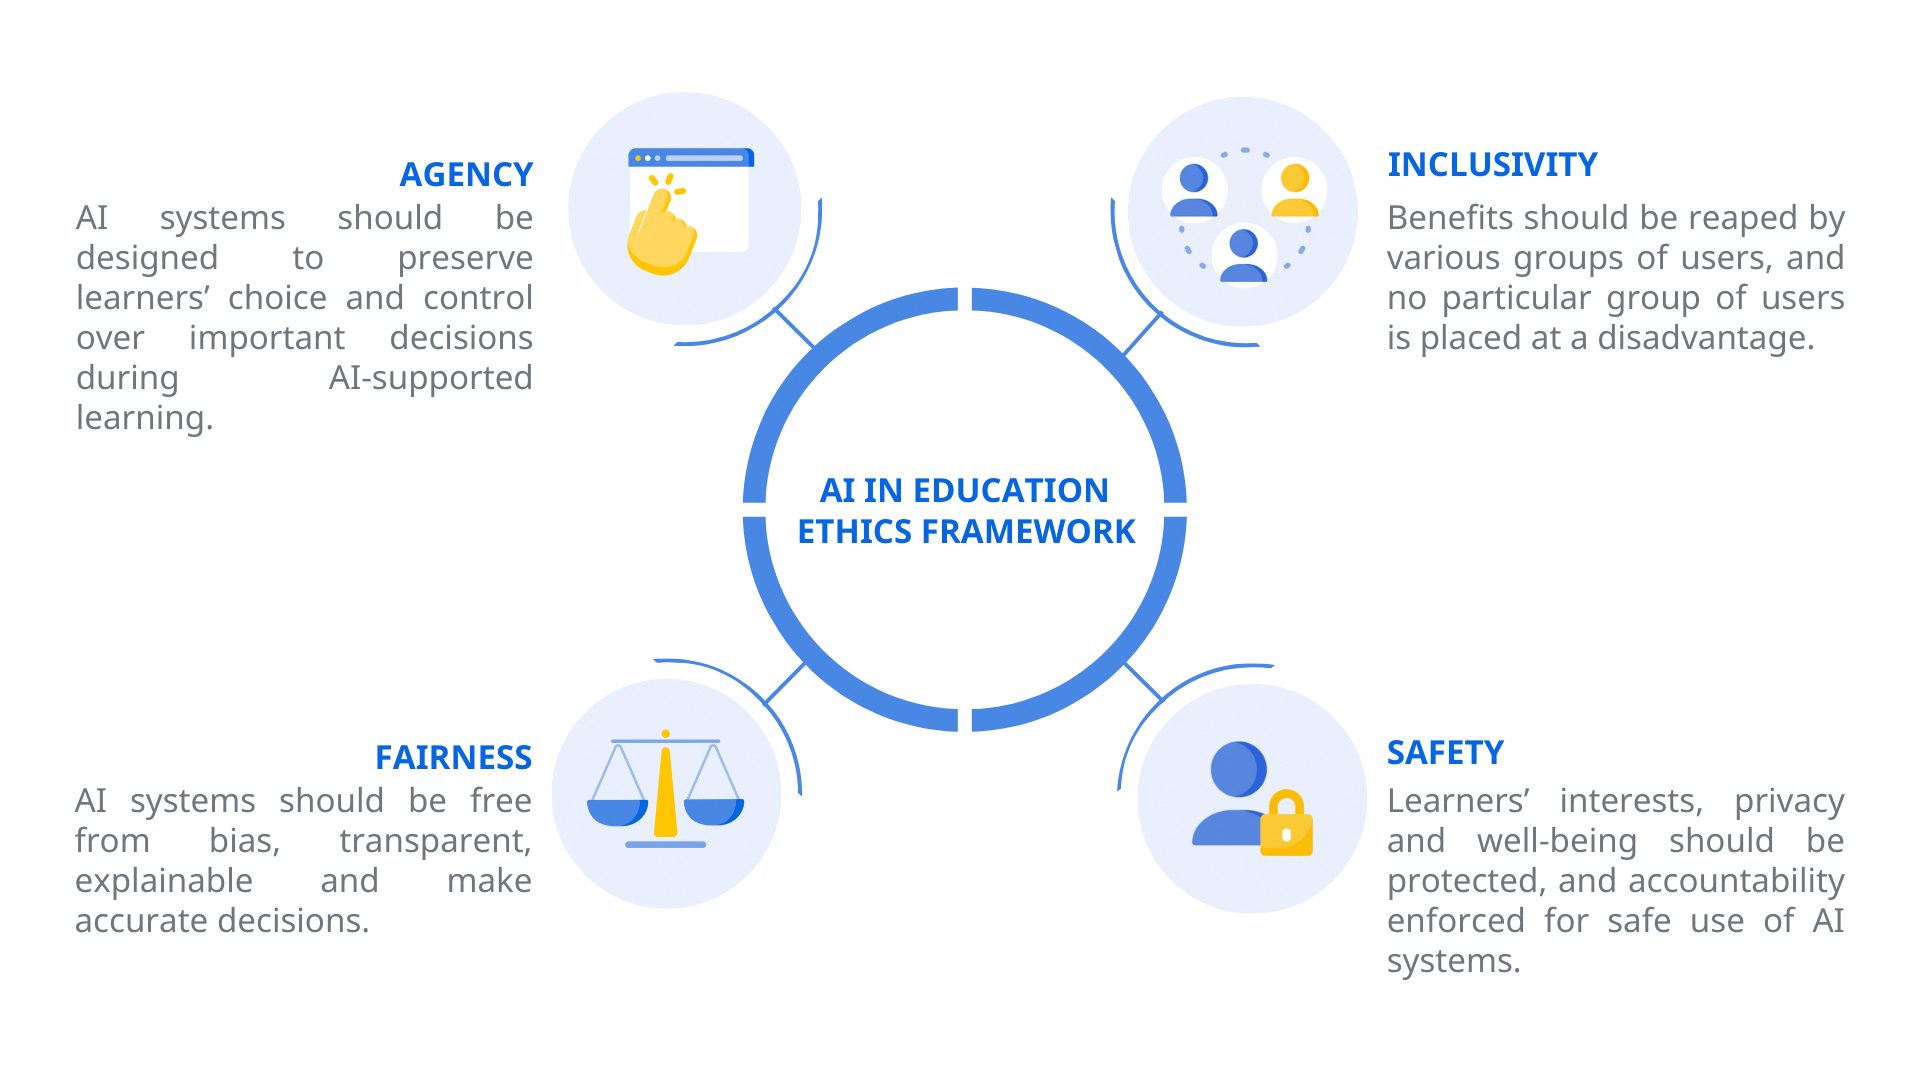 ethics principles, safety, inclusivity, agency, fairness